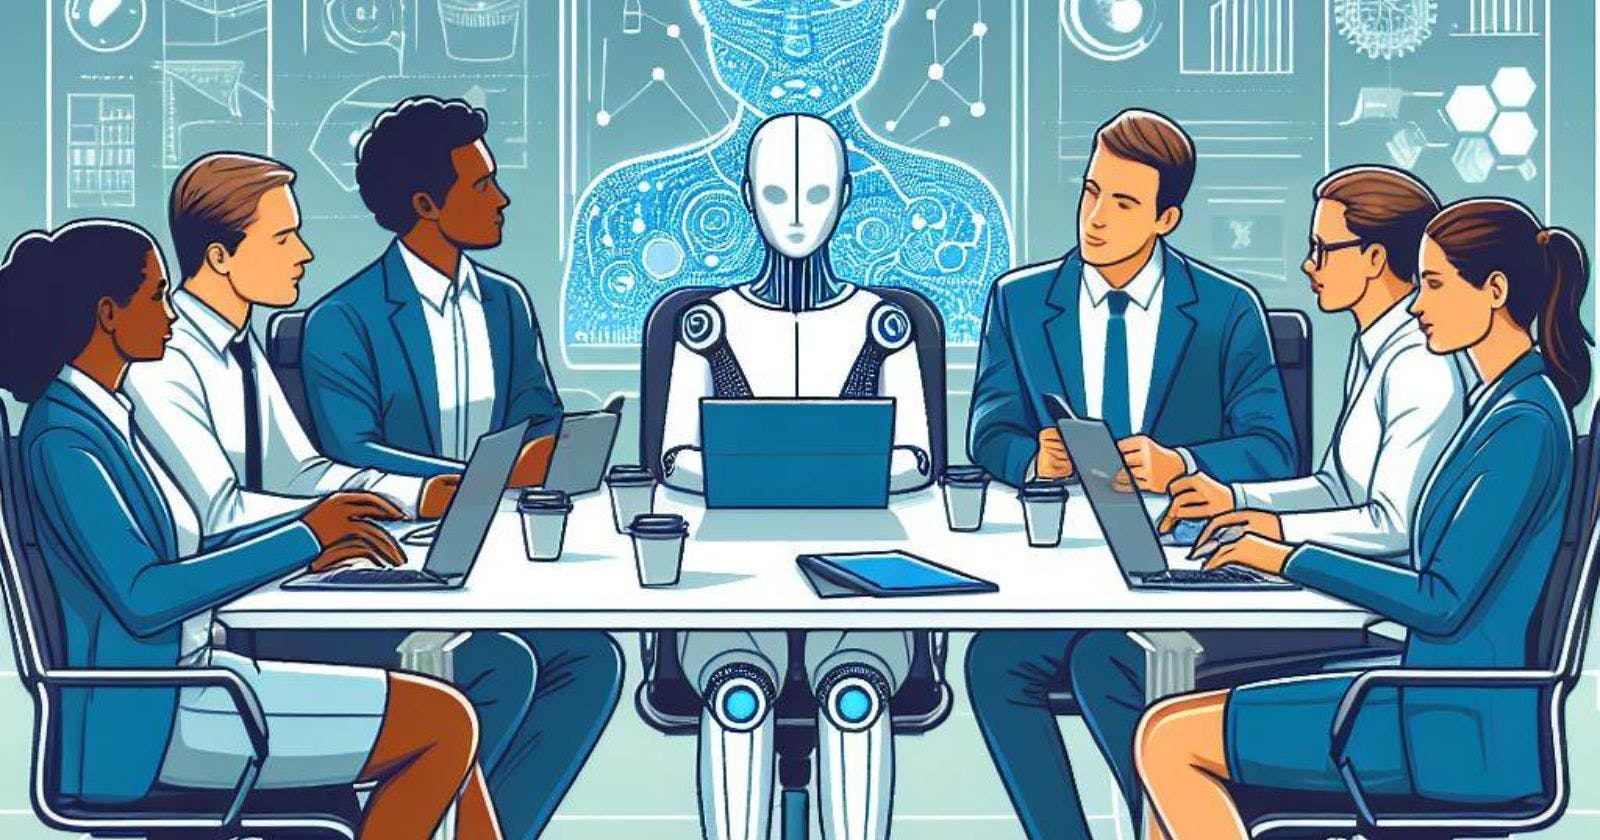 Why Consider Relational Ethics with AI in Business Decisions?